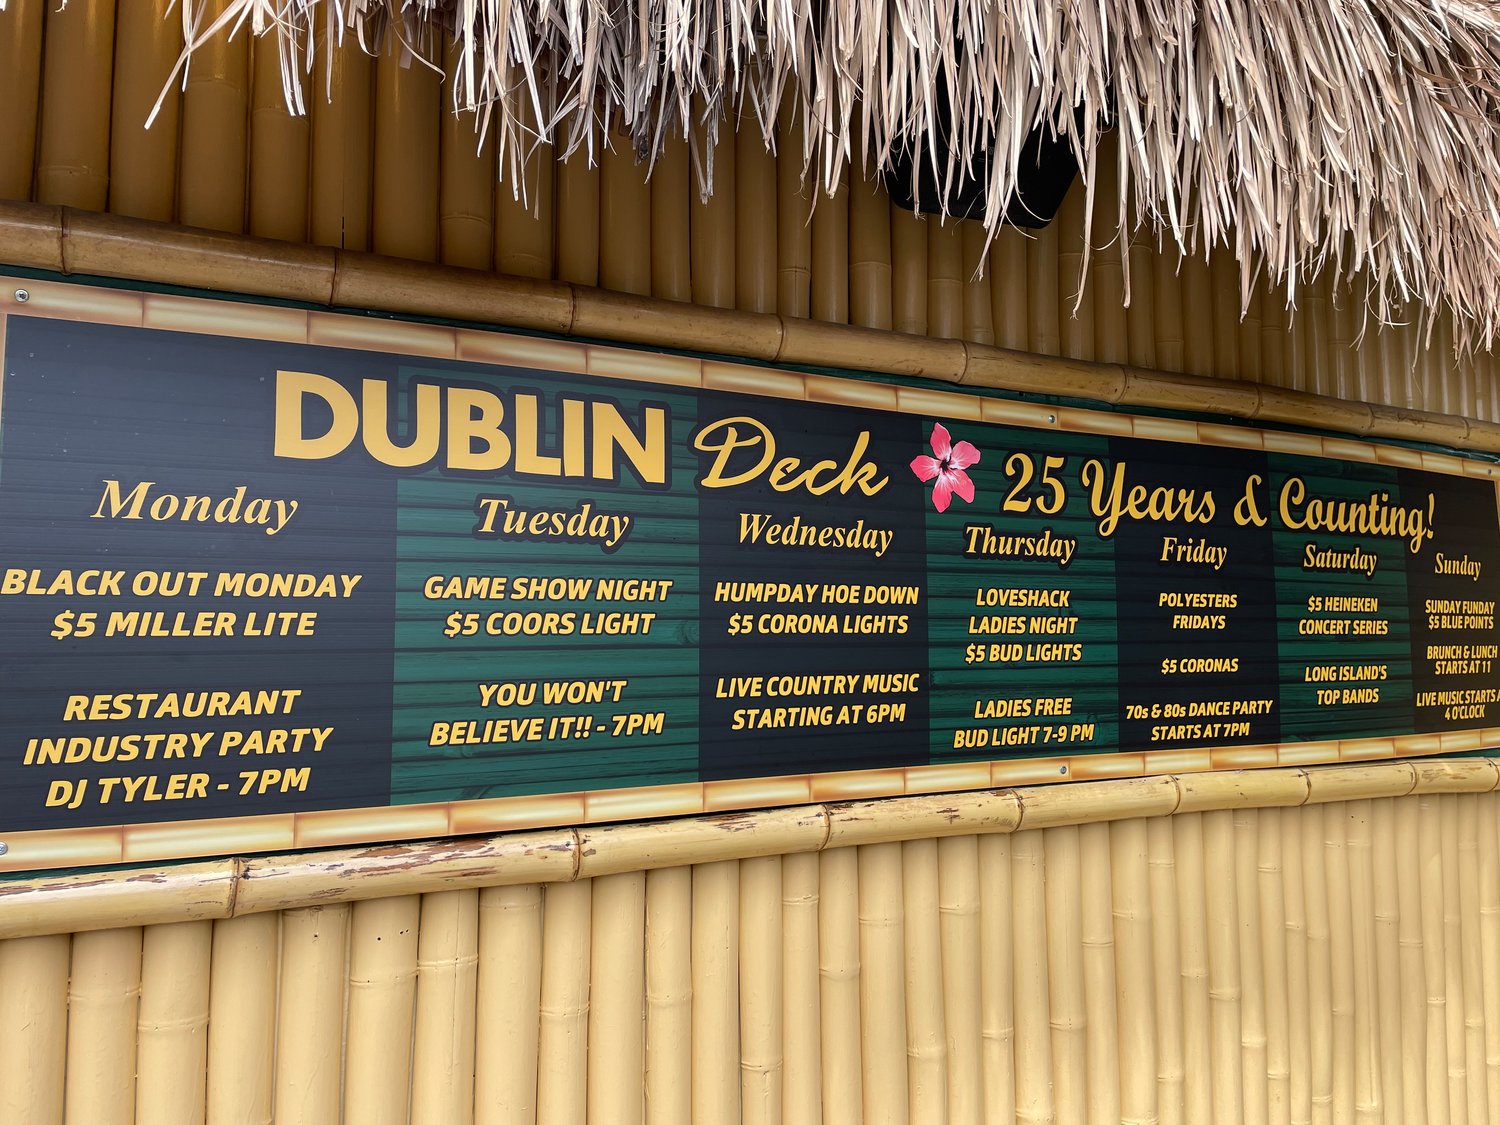 Dublin Deck celebrates its 25th anniversary with fun events and drink deals all summer long.